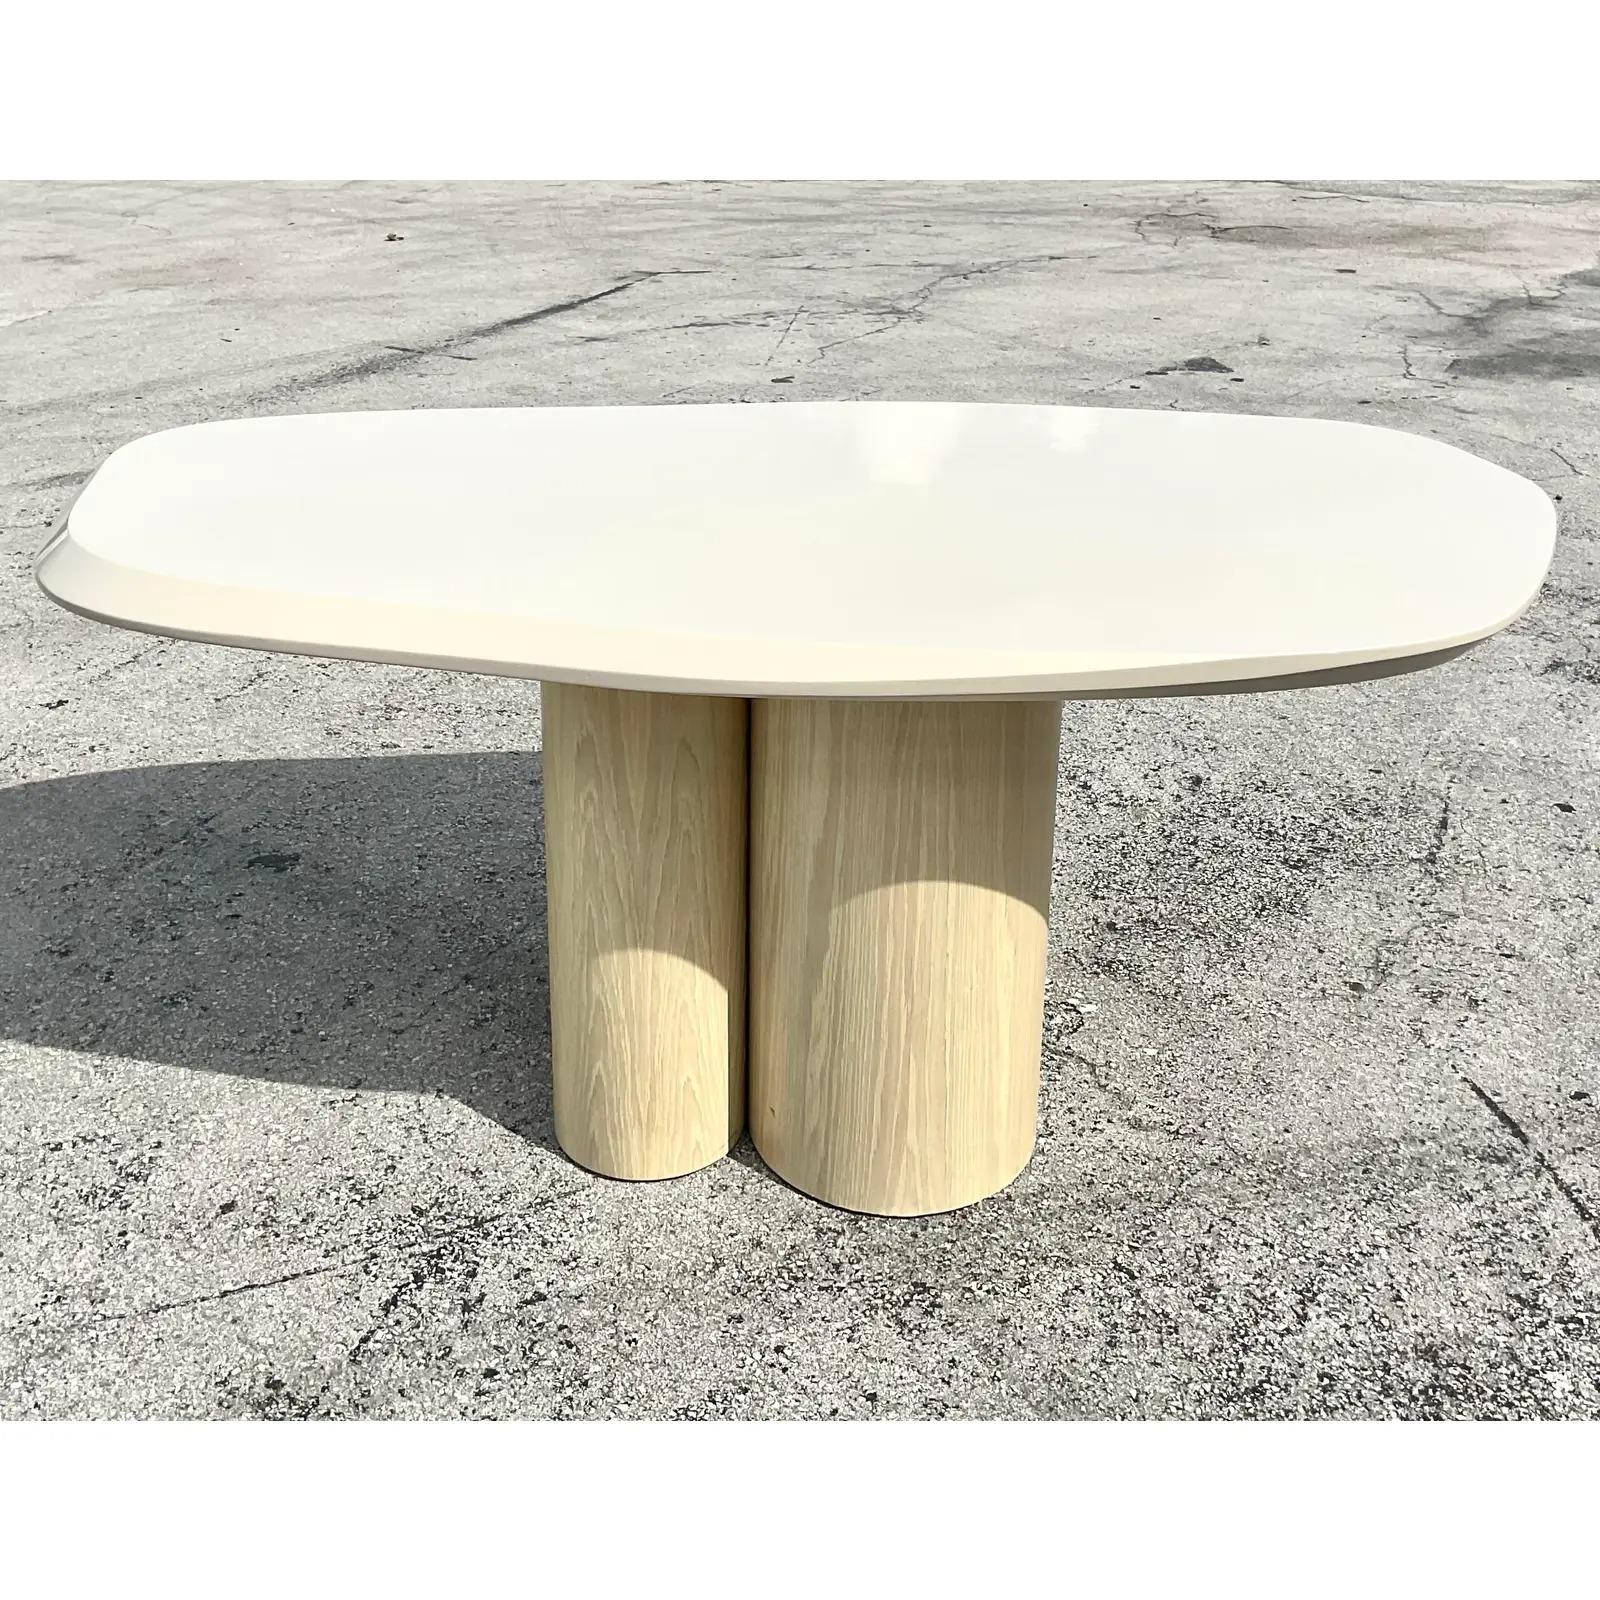 Fabulous vintage Contemporary dining table. Custom built with a chic lacquered top with a faceted edge. Three cerused oak cylinders create the perfect pedestal for such a dramatic top. Acquired from a Palm Beach estate.